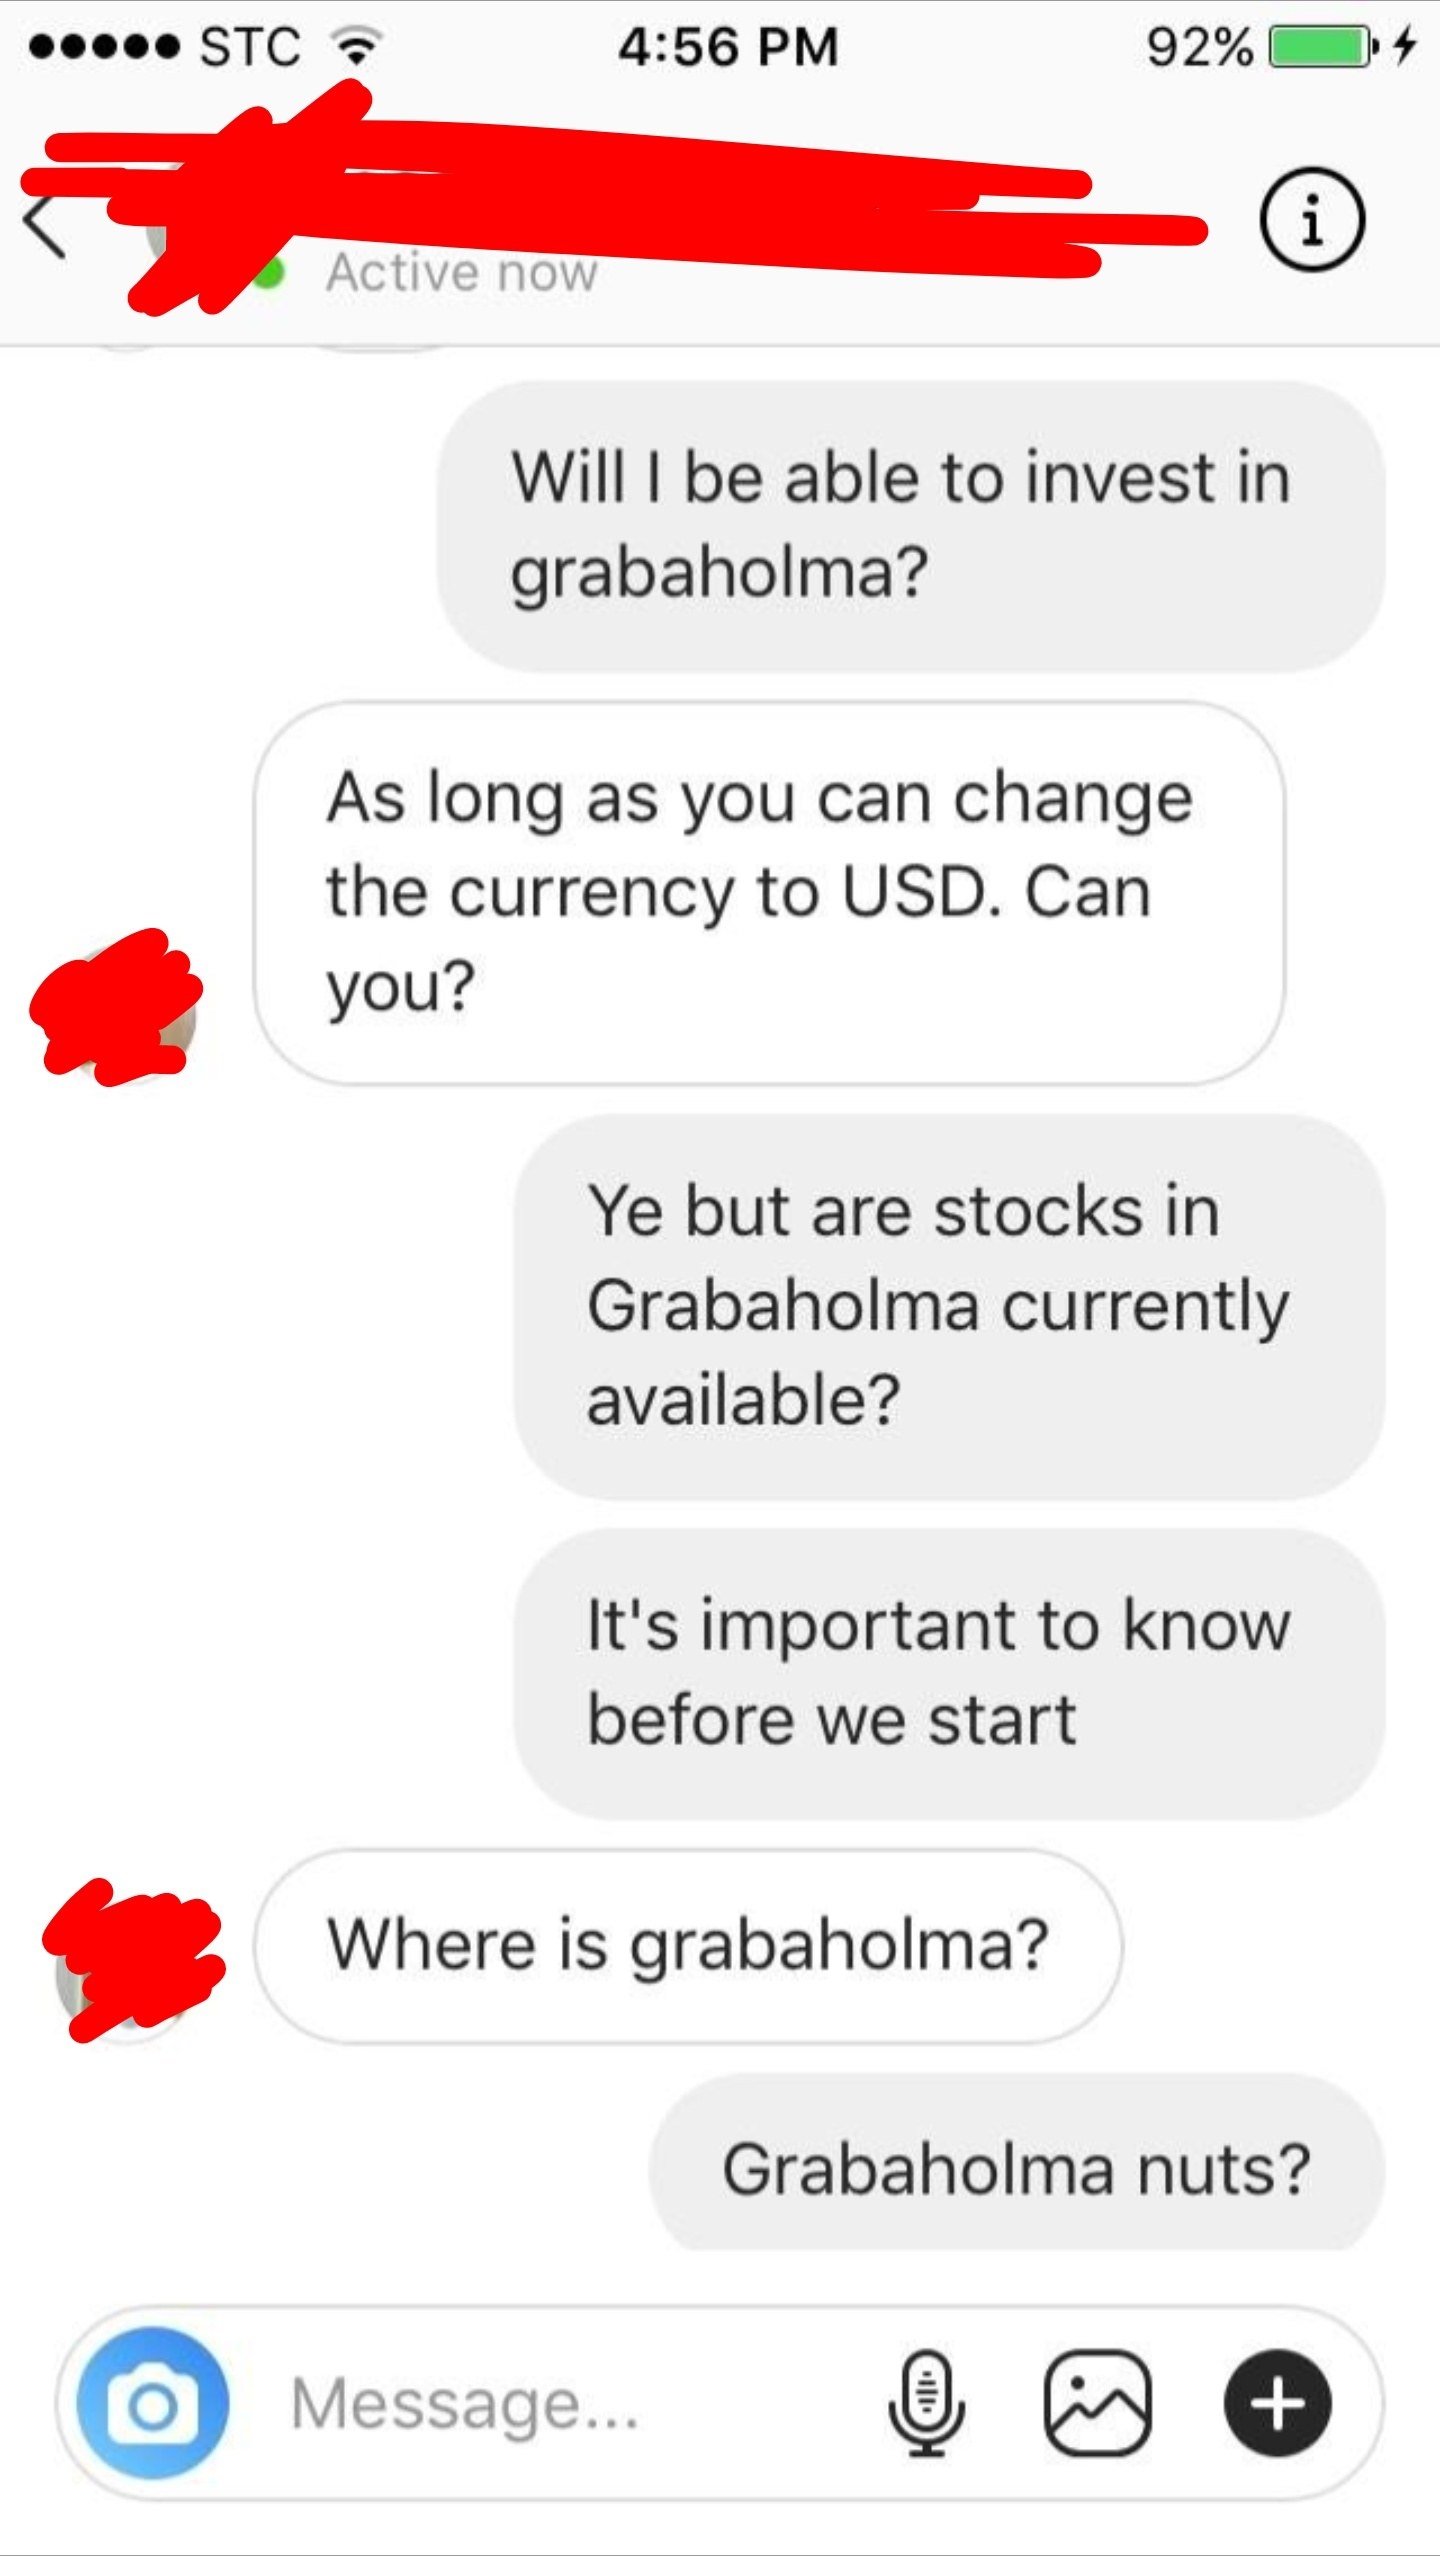 scammer being made to say grabaholma nuts